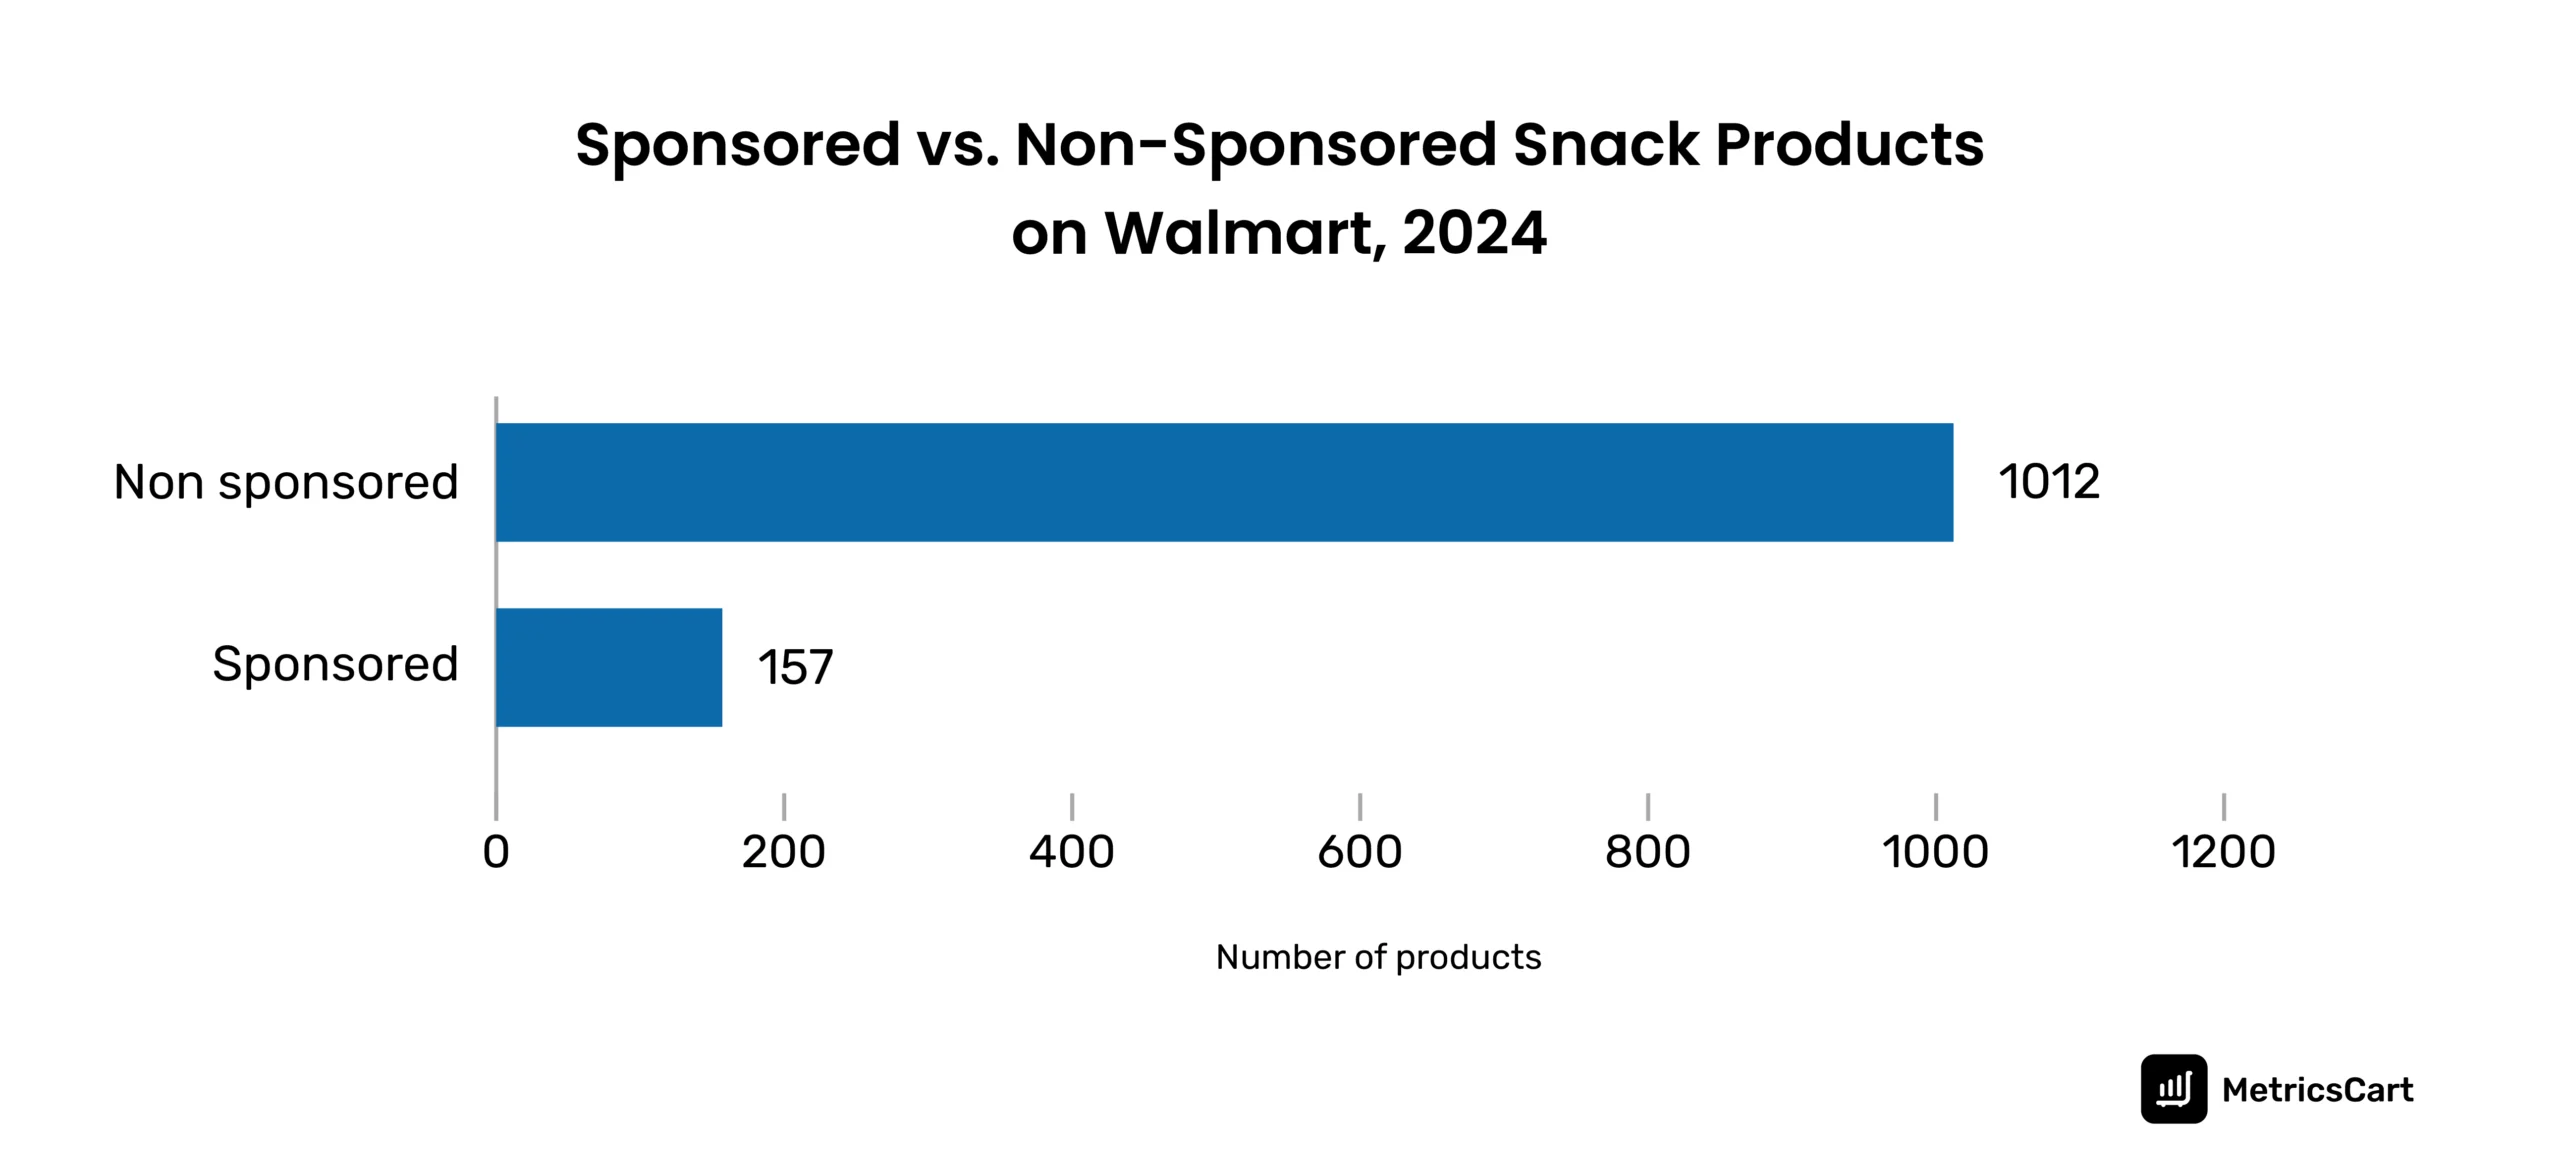 Bar chart displaying the total number of sponsored and non-sponsored snack products at Walmart in 2024.